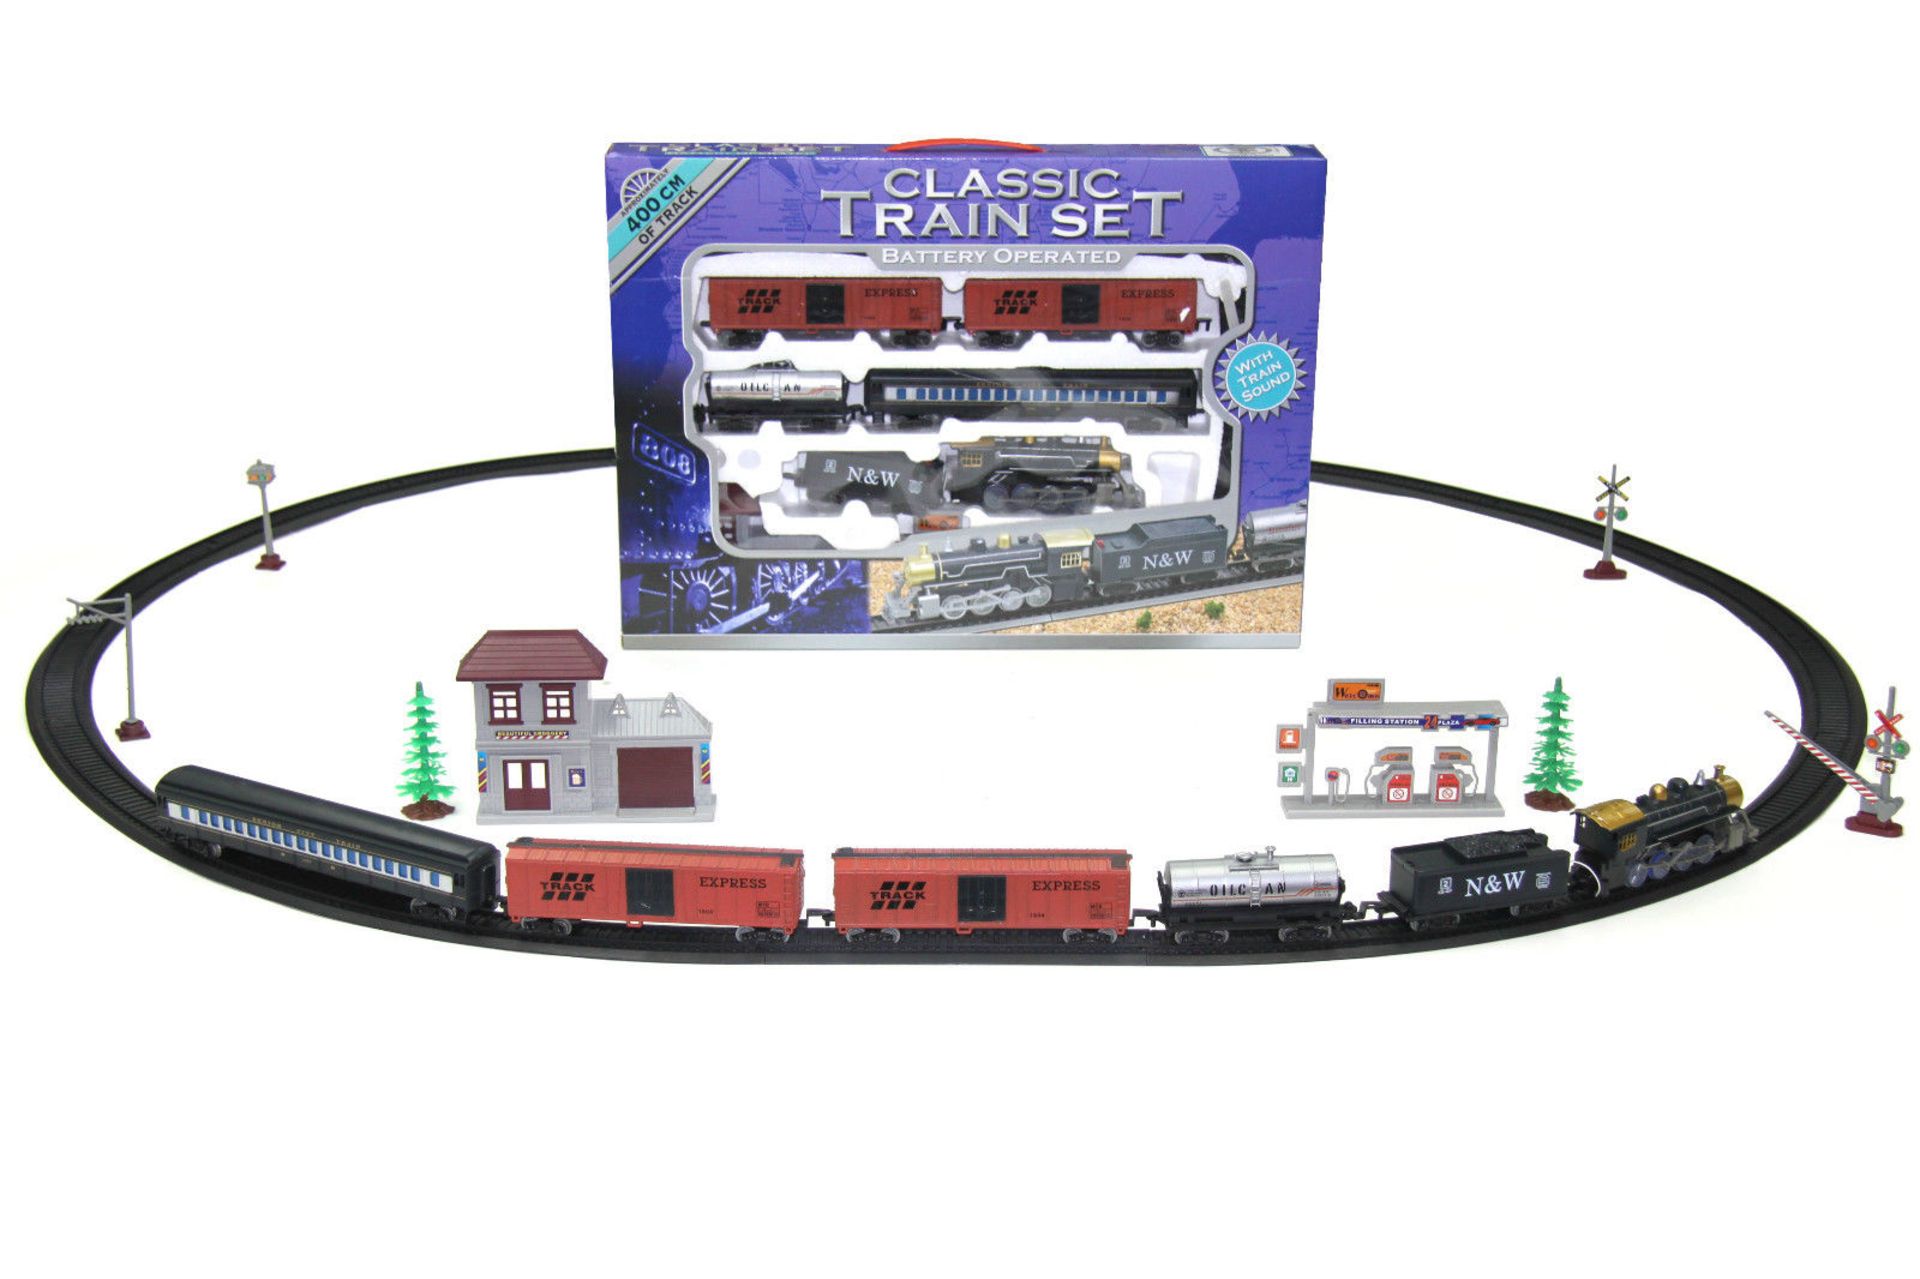 V *TRADE QTY* Brand New Classic Train Set Including 400cm of Track - Engine and Tender - Rail